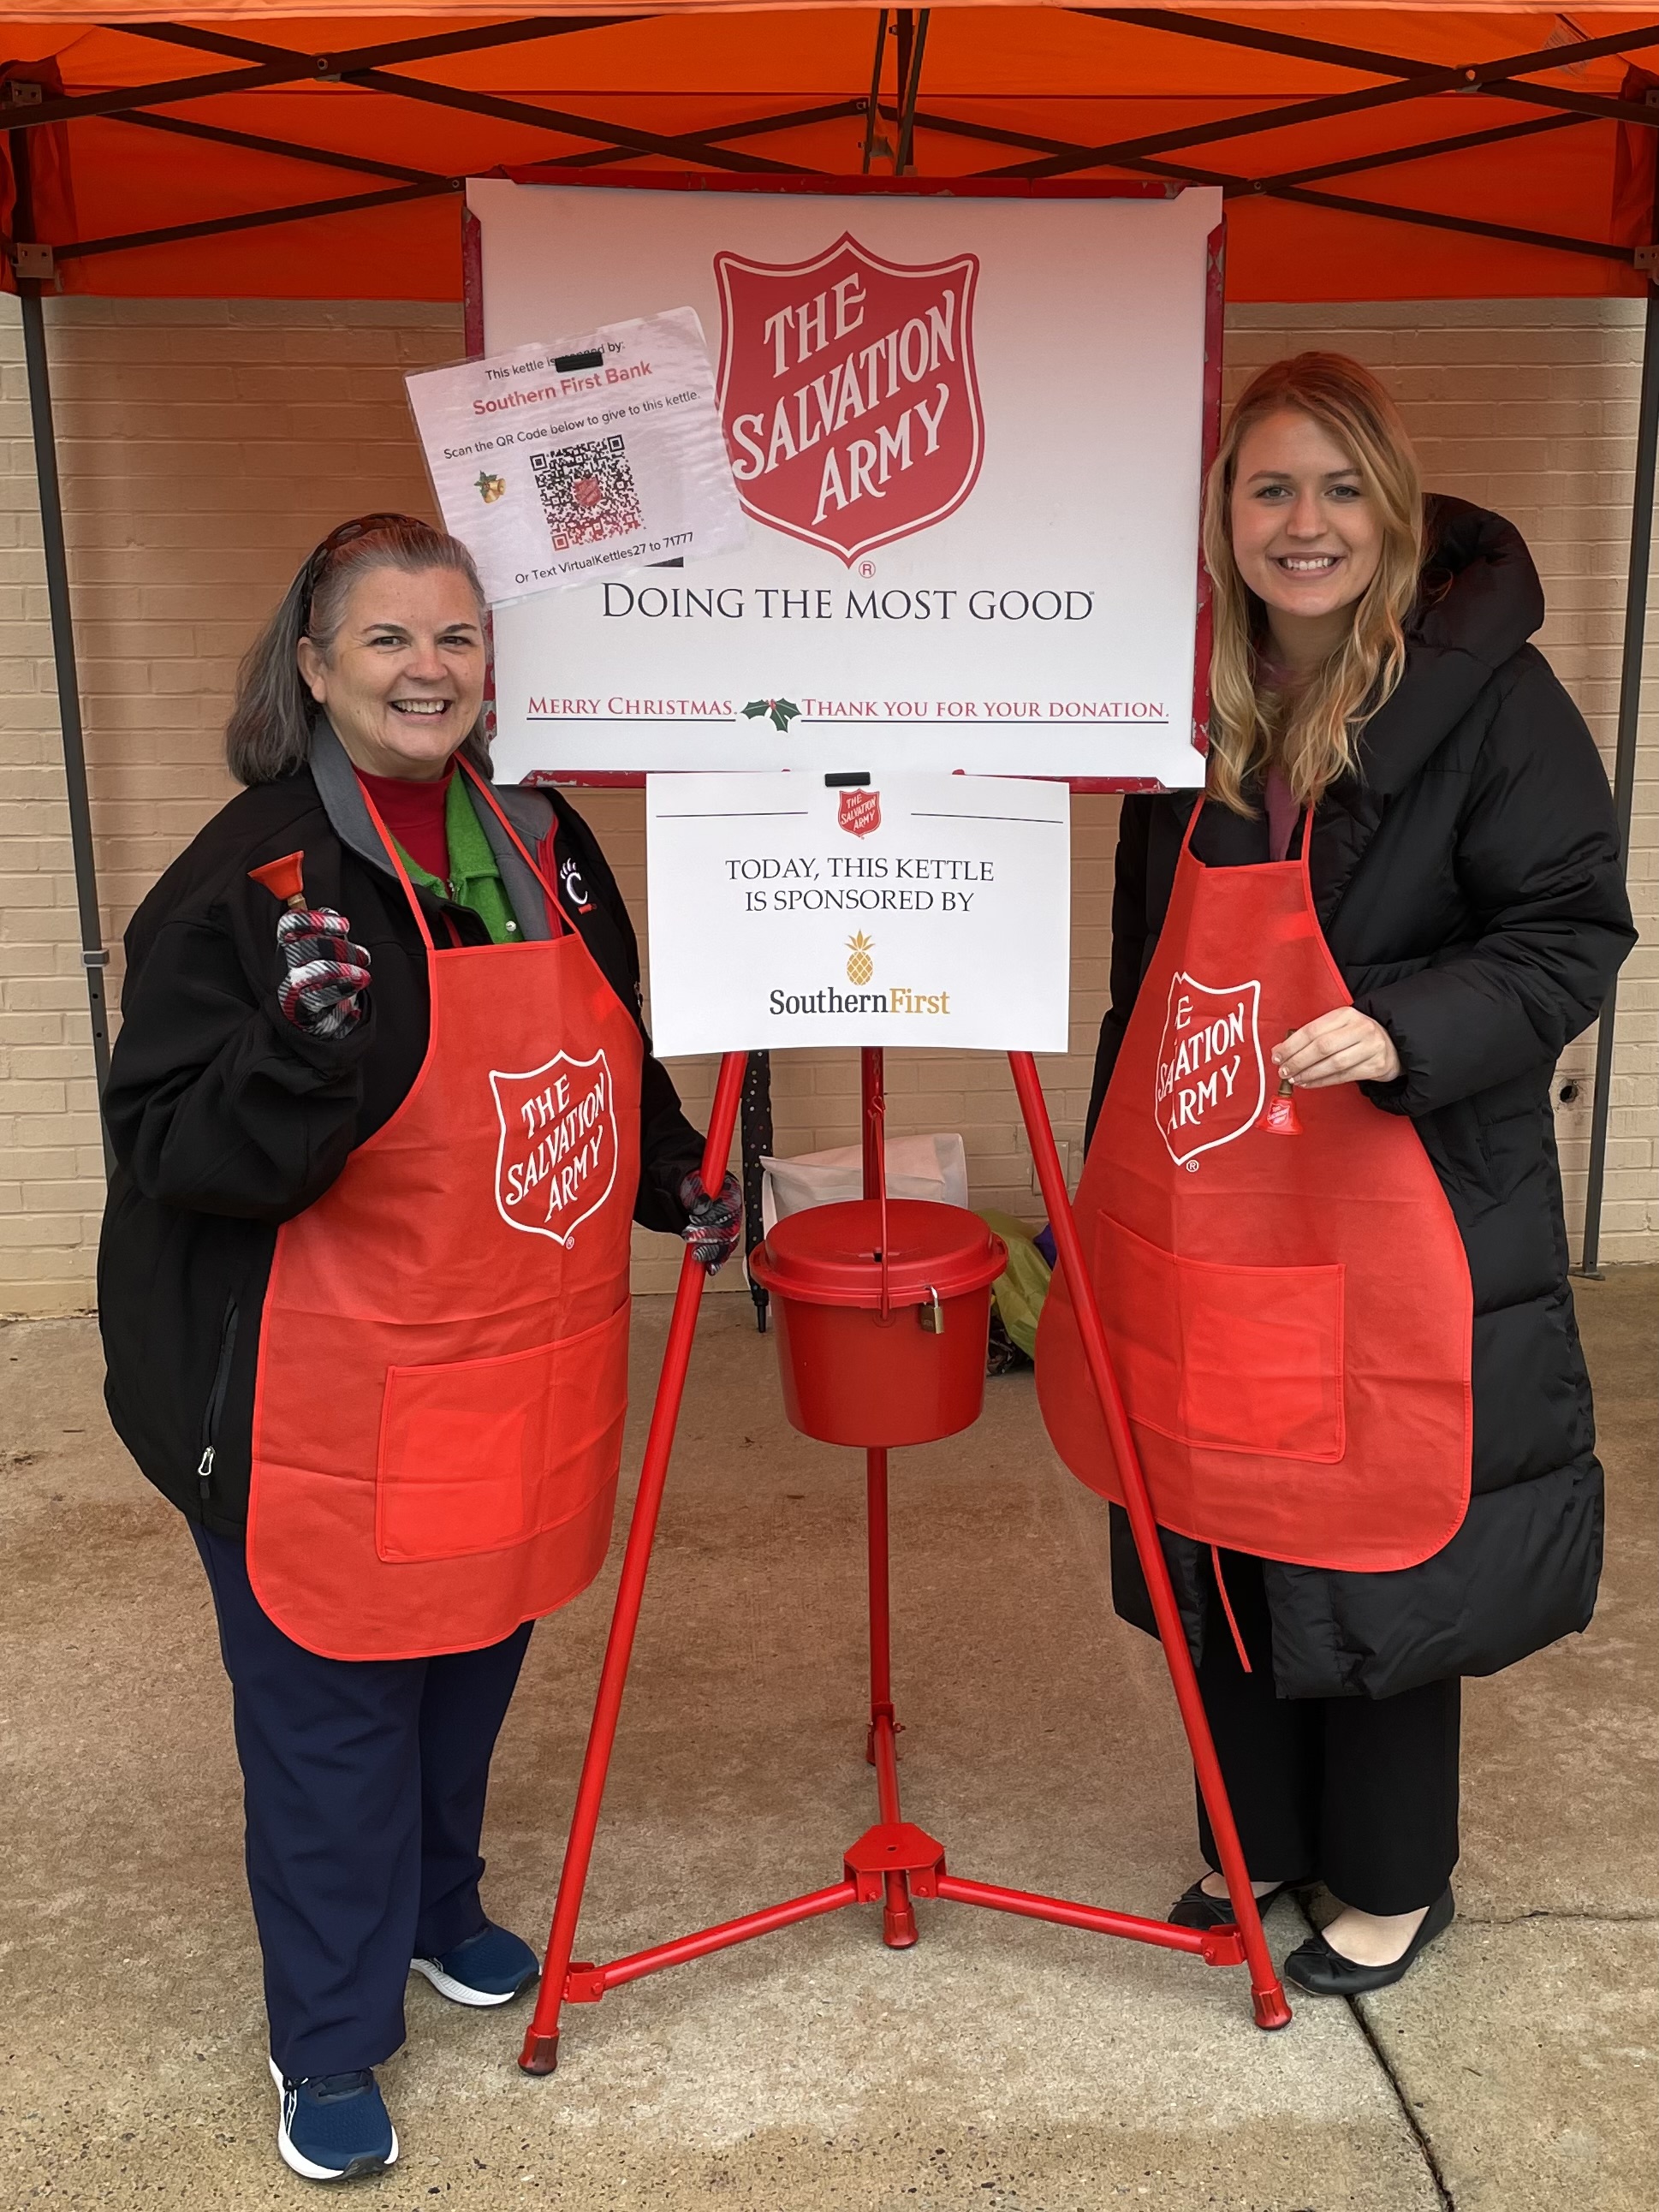 Two Southern First associates bell ringing for the Salvation Army's Red Kettle Campaign.